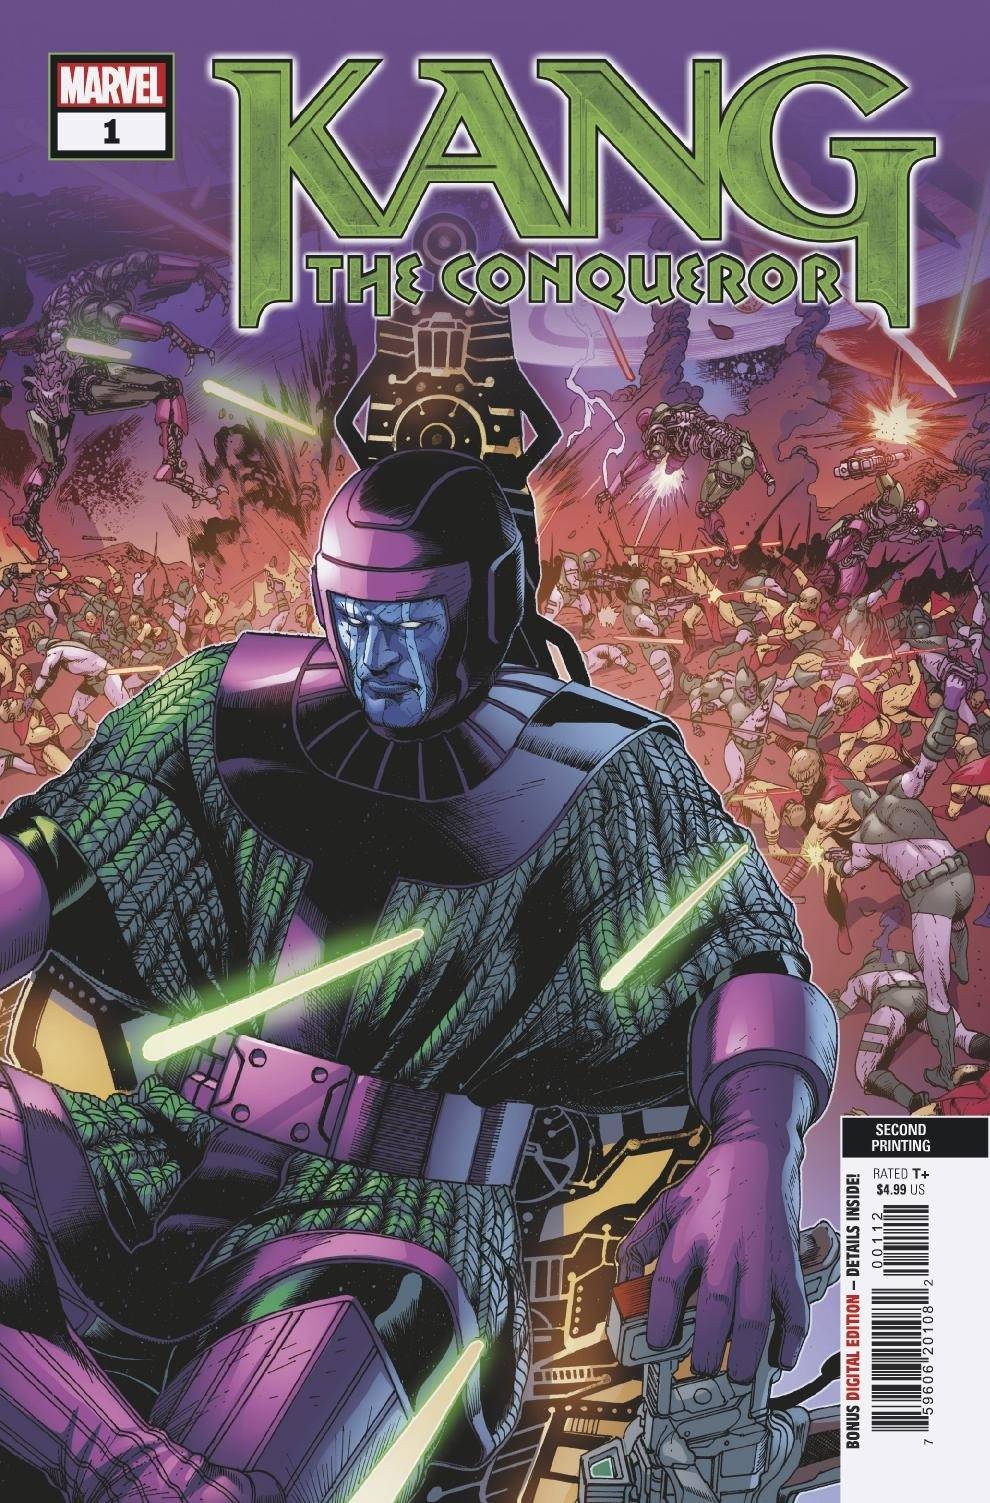 Kang The Conqueror #1 (Of 5) 2nd Print Mike Del Mundo Variant (09/29/2021) Marvel